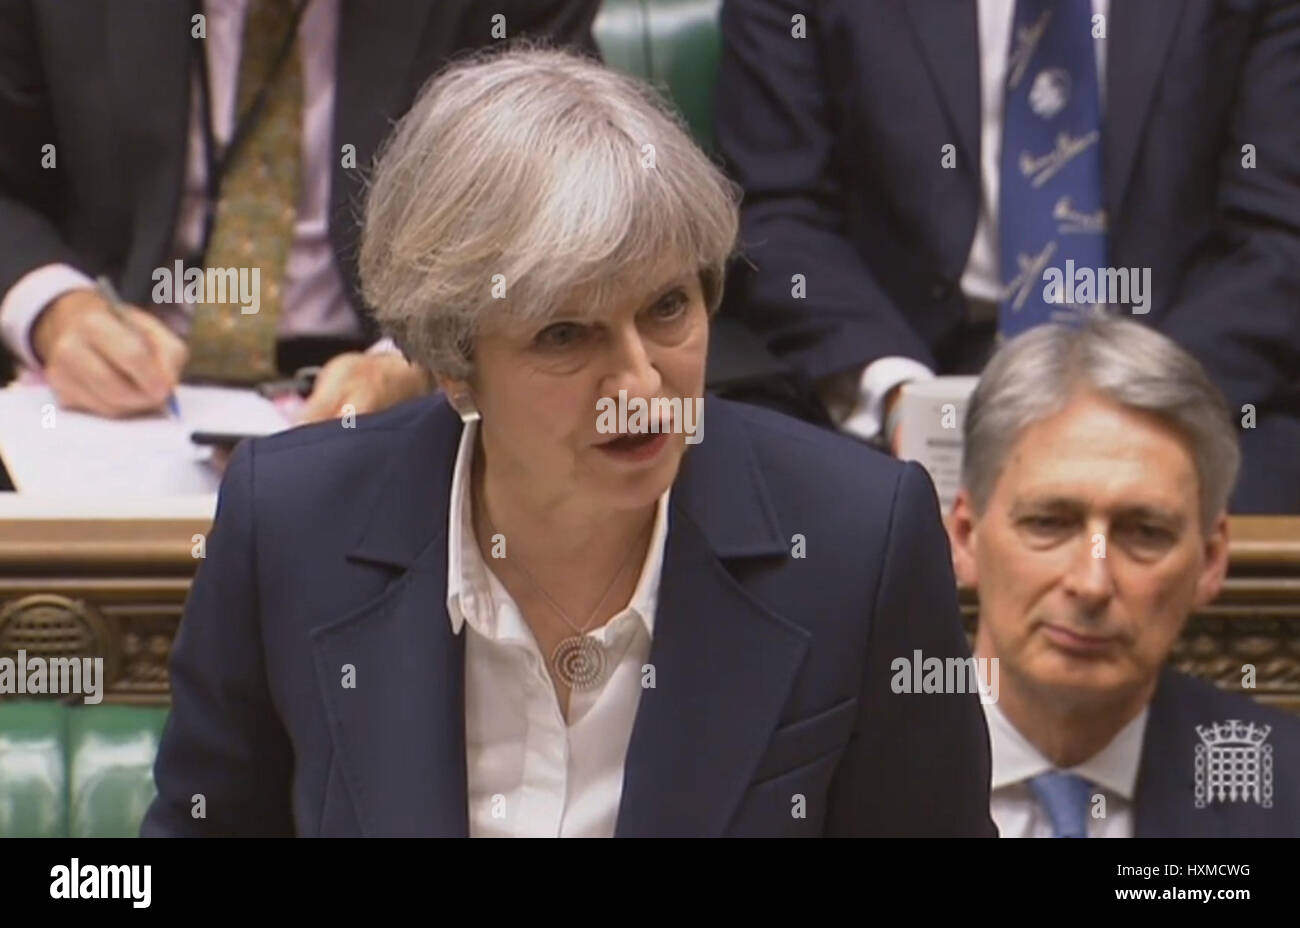 Prime Minister Theresa May announces in the House of Commons, London, that she has triggered Article 50, starting a two-year countdown to the UK leaving the EU. Stock Photo